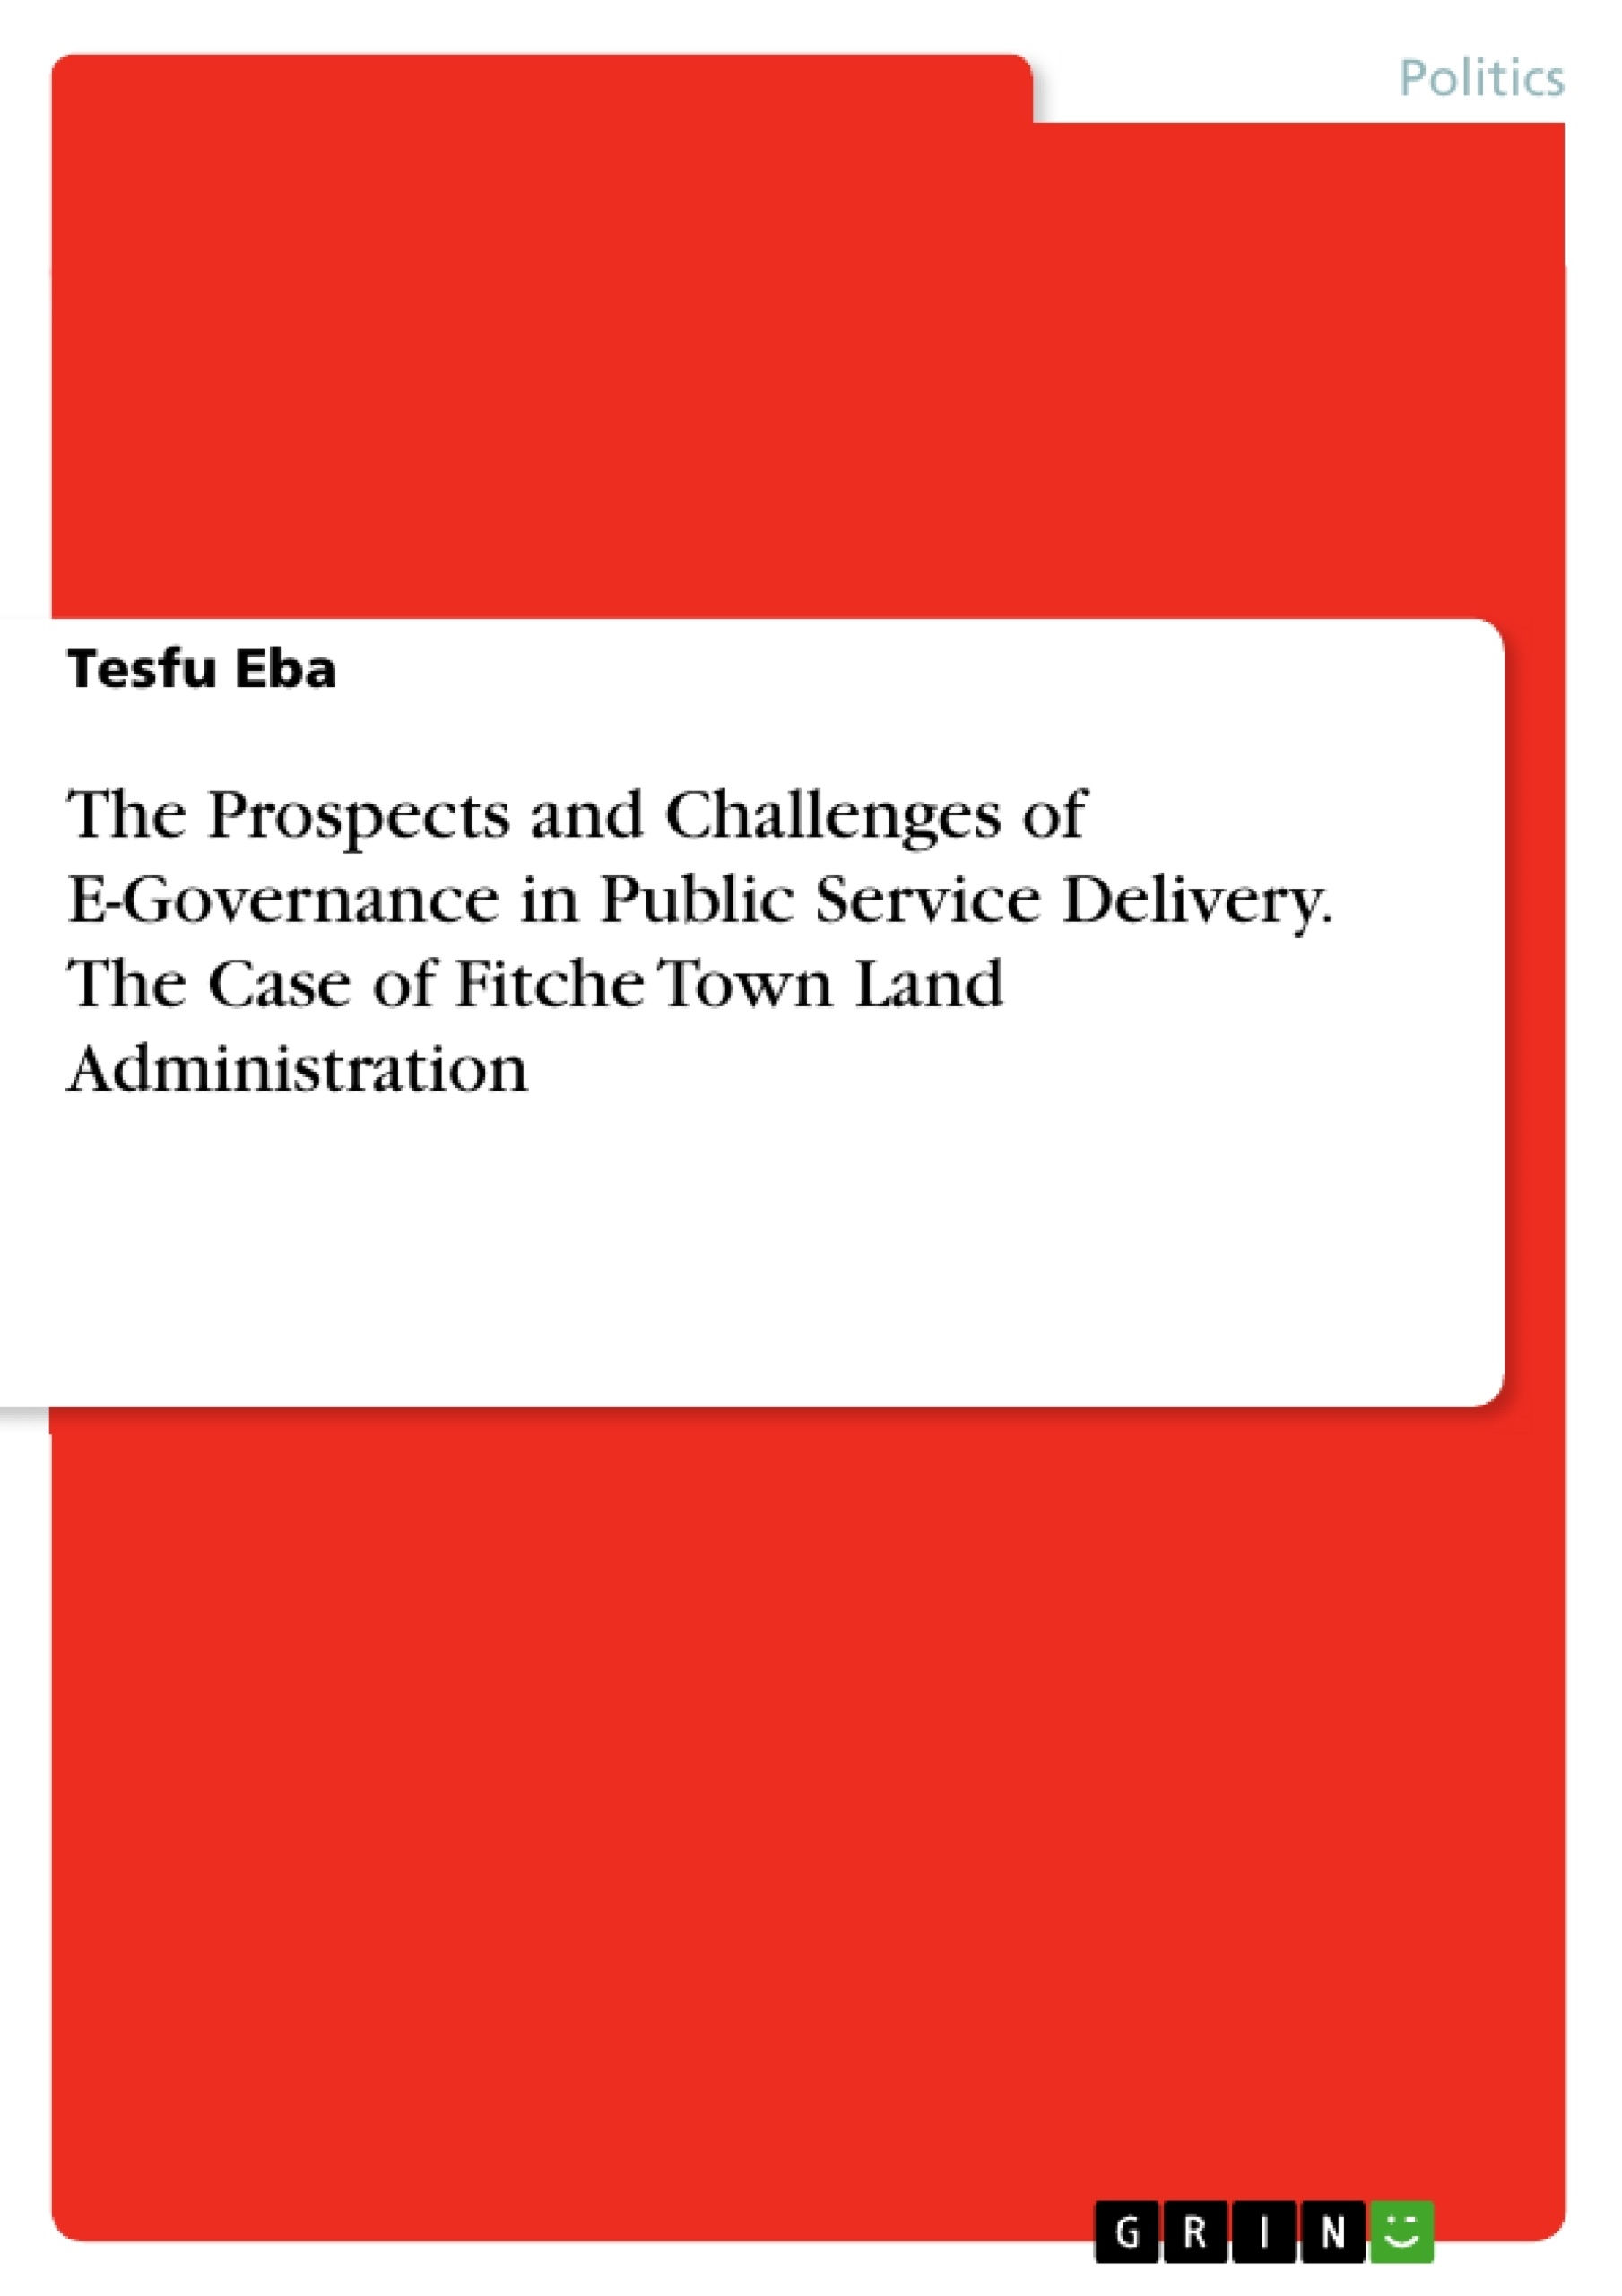 Title: The Prospects and Challenges of E-Governance in Public Service Delivery. The Case 
of Fitche Town Land Administration